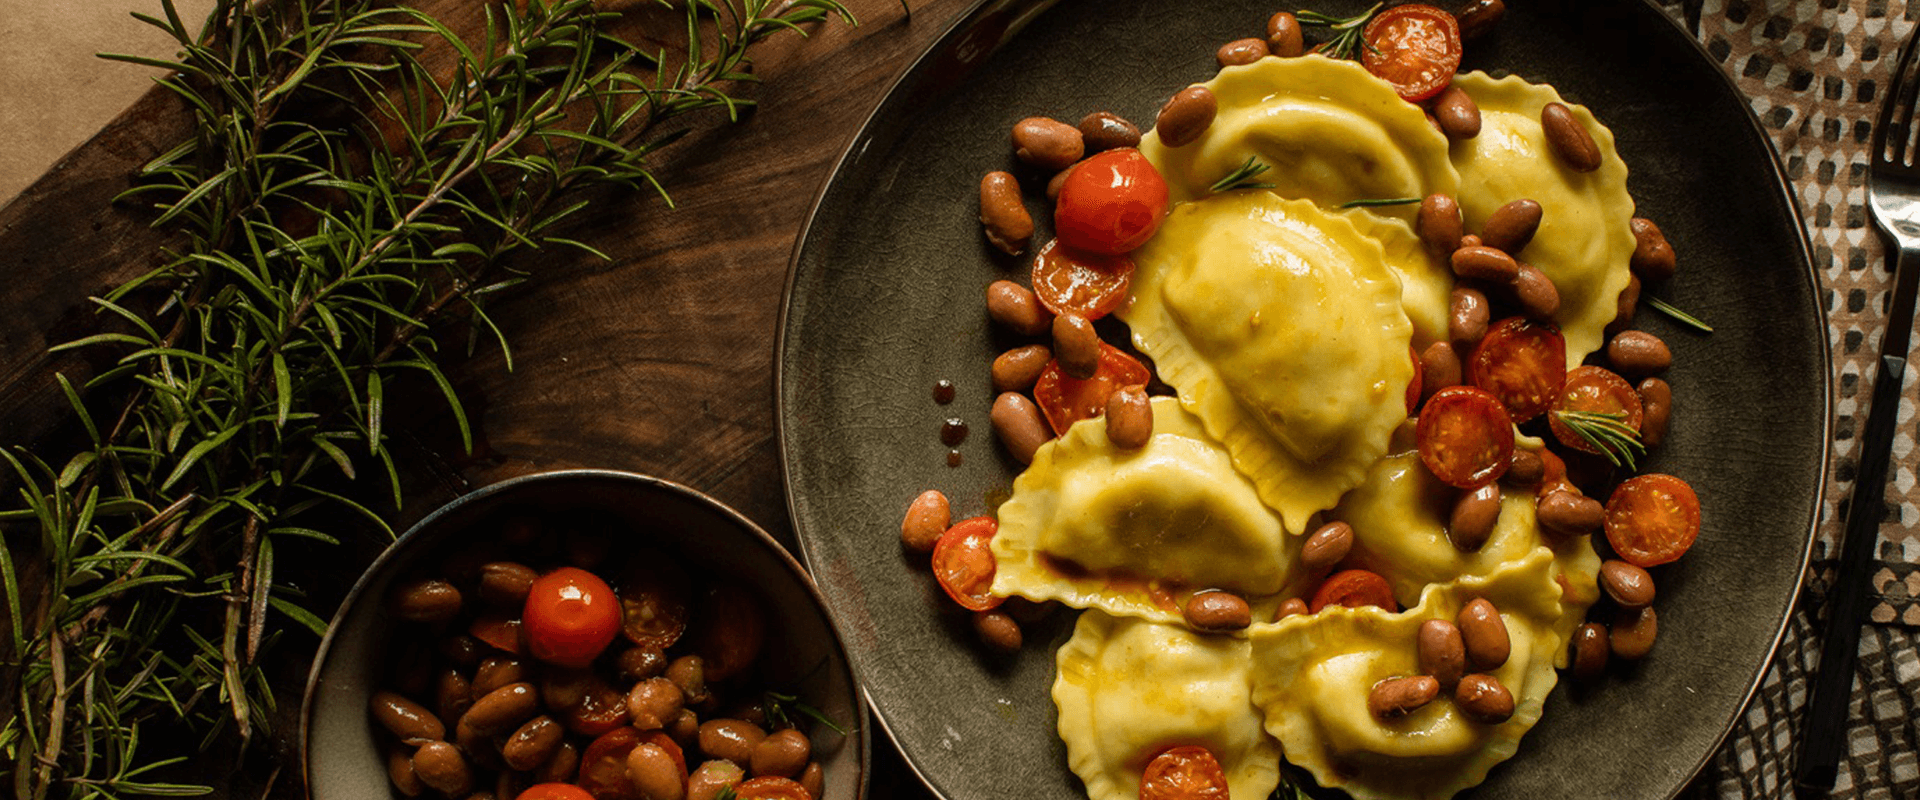 CA_ITALIAN-SAUSAGE-RAVIOLI-WITH-BEANS-ROASTED-TOMATOES-AND-BALSAMIC_1920x800.png